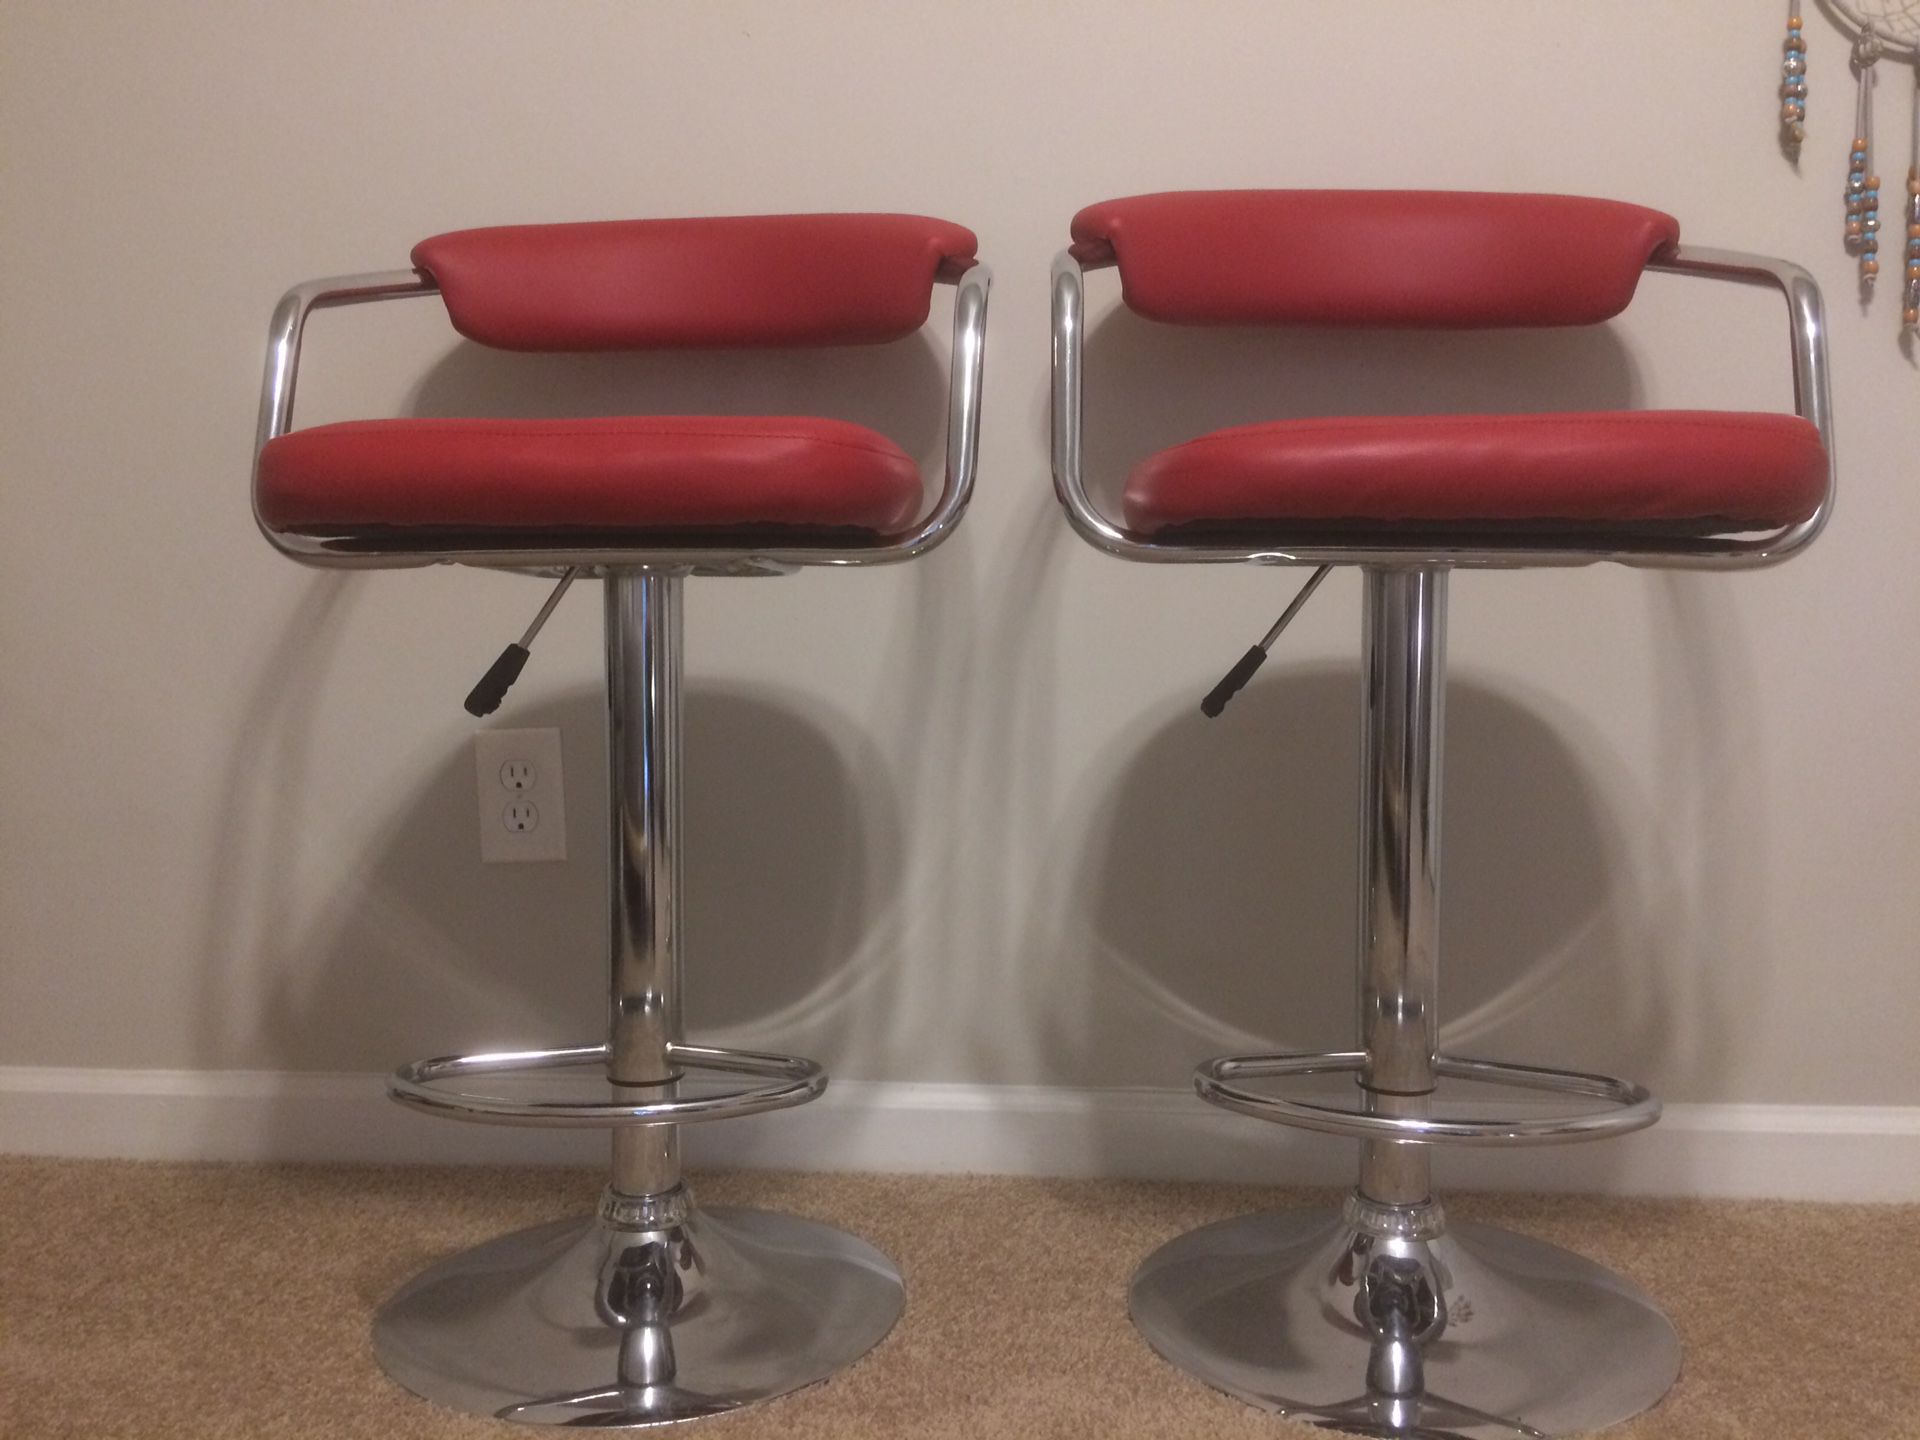 Two Red Barstools